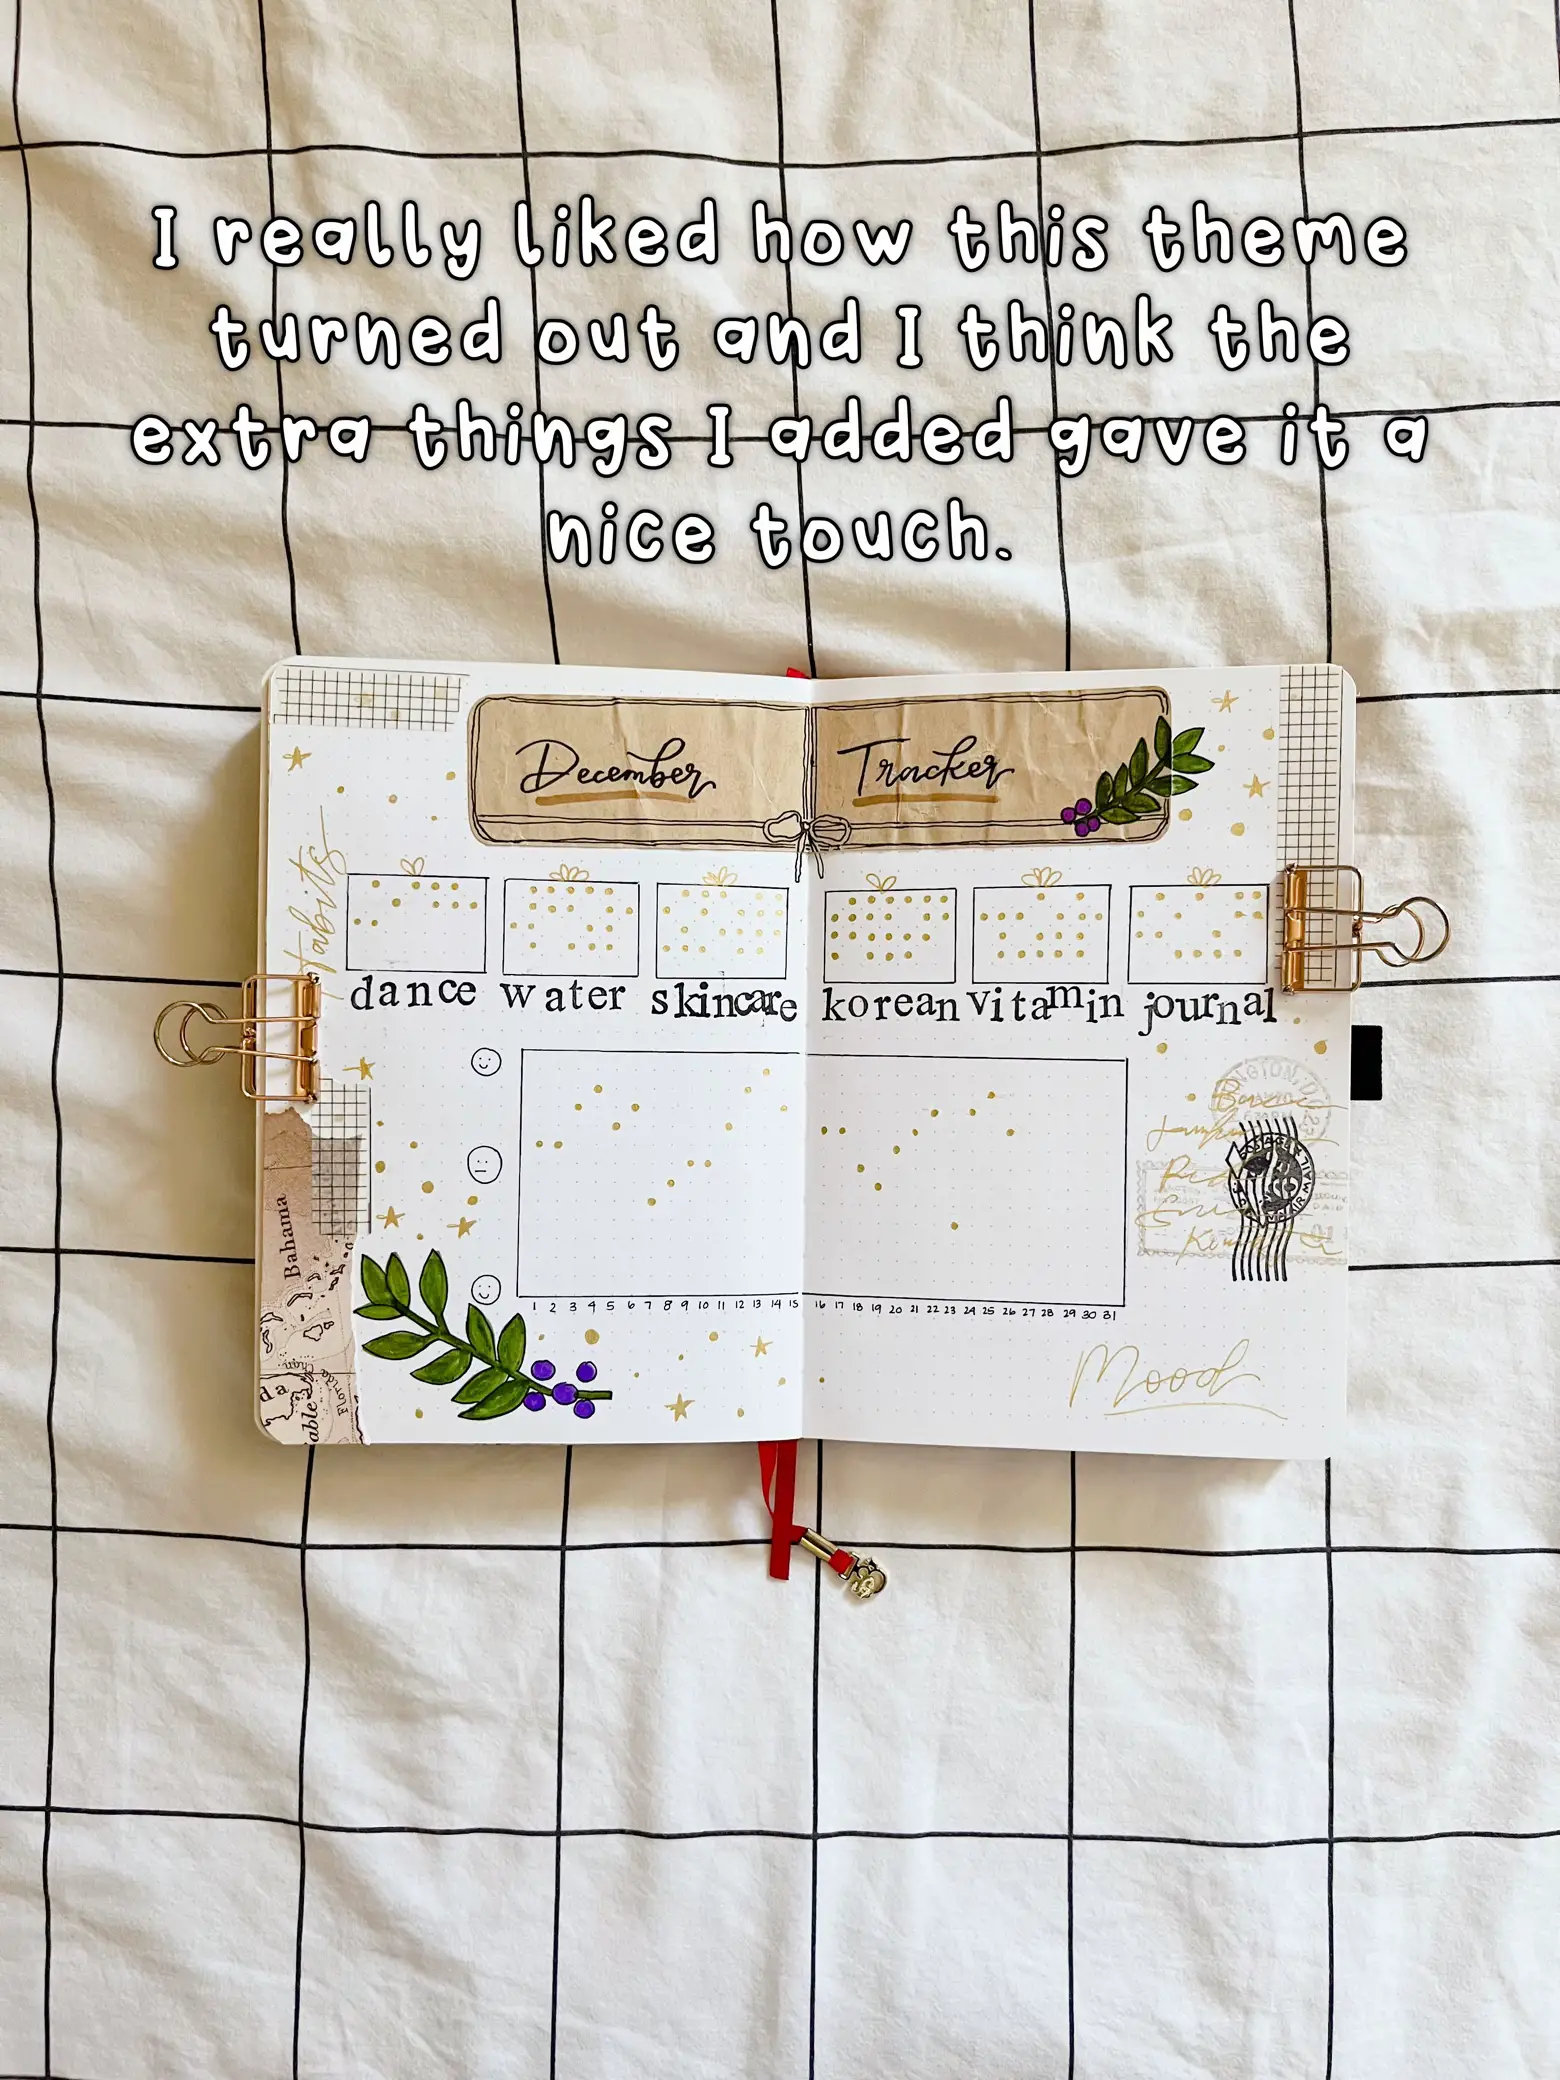 How to Use Bullet Journal Stamps to Spice Up Your Page - Planning Mindfully